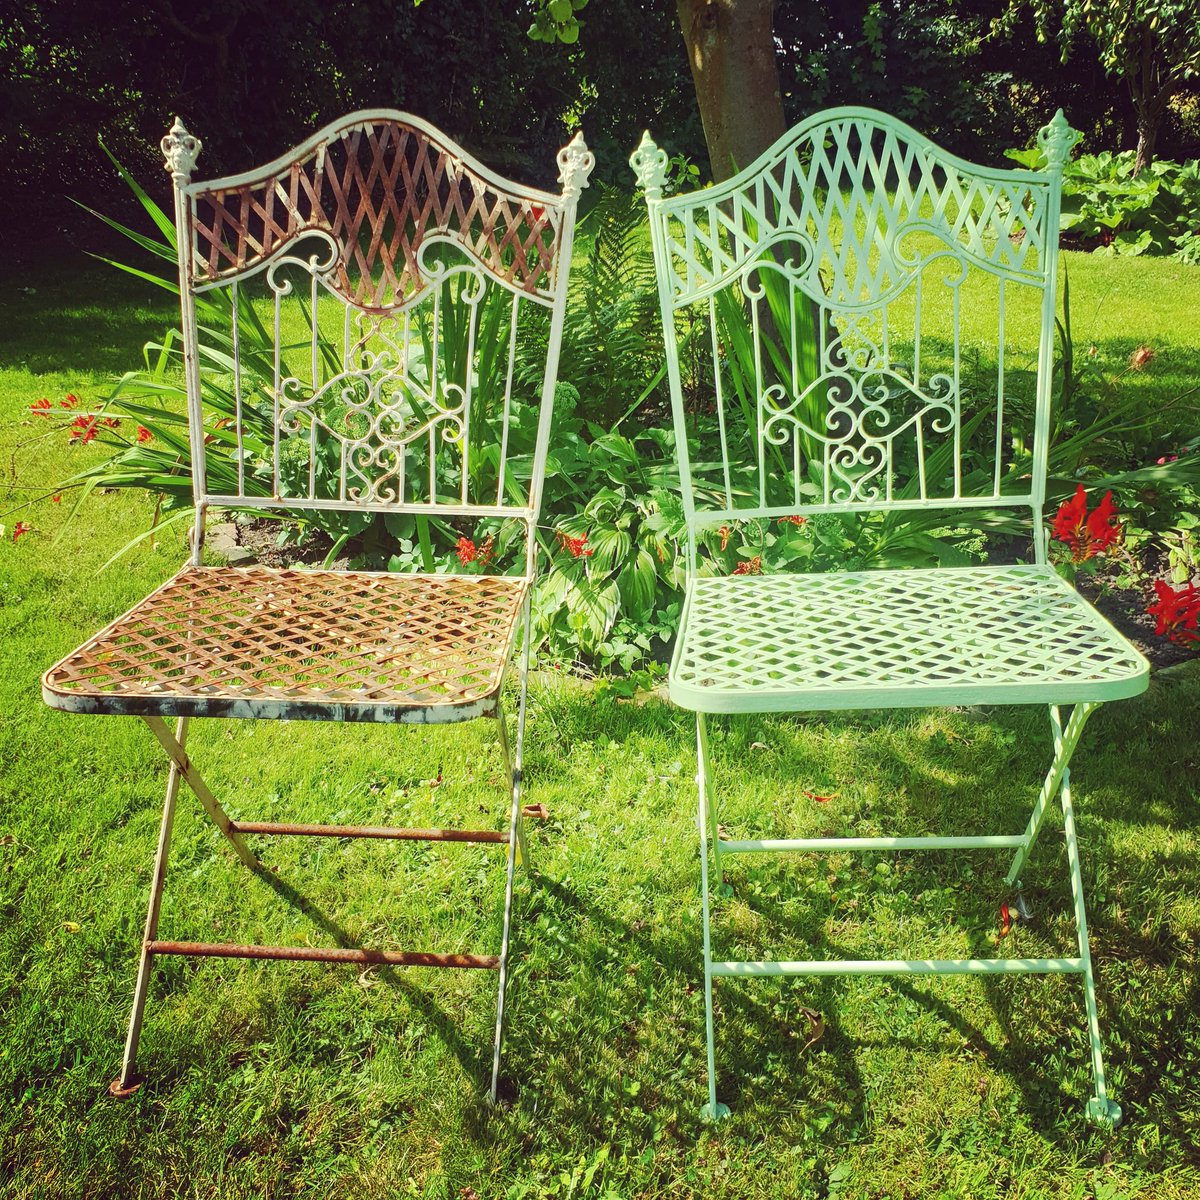 Before and after... Finally getting to paint our pre-lockdown purchase. 4 chairs and a table to be stripped of old paint and re-painted! #upcycle #restorationproject #gardenfurniture #hammerite #newold #restoredfurniture #beforeandafter #labouroflove